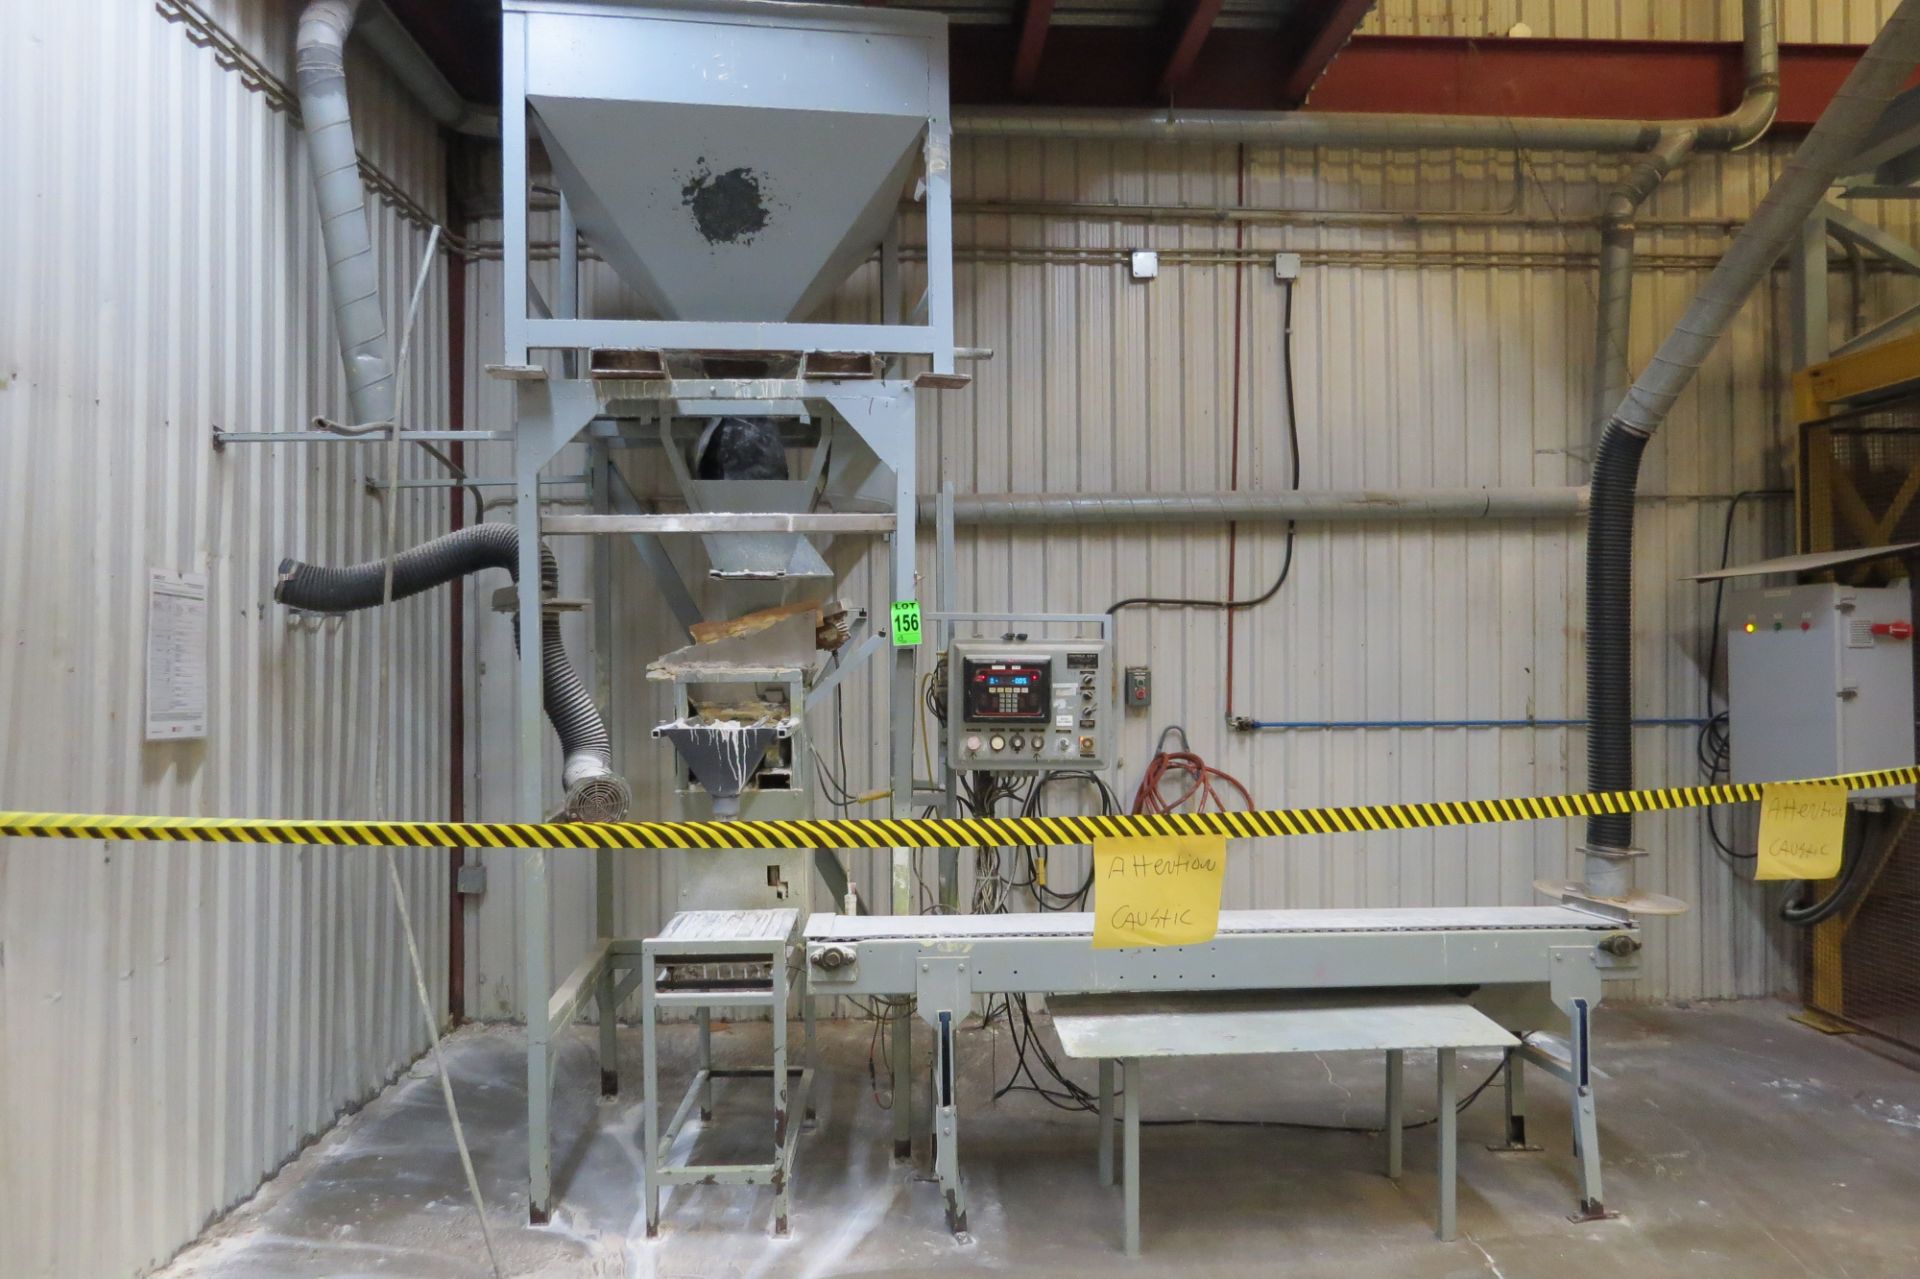 Custom powder filling machine with GMC Controller, hopper, conveyor - formerly used for caustic prod